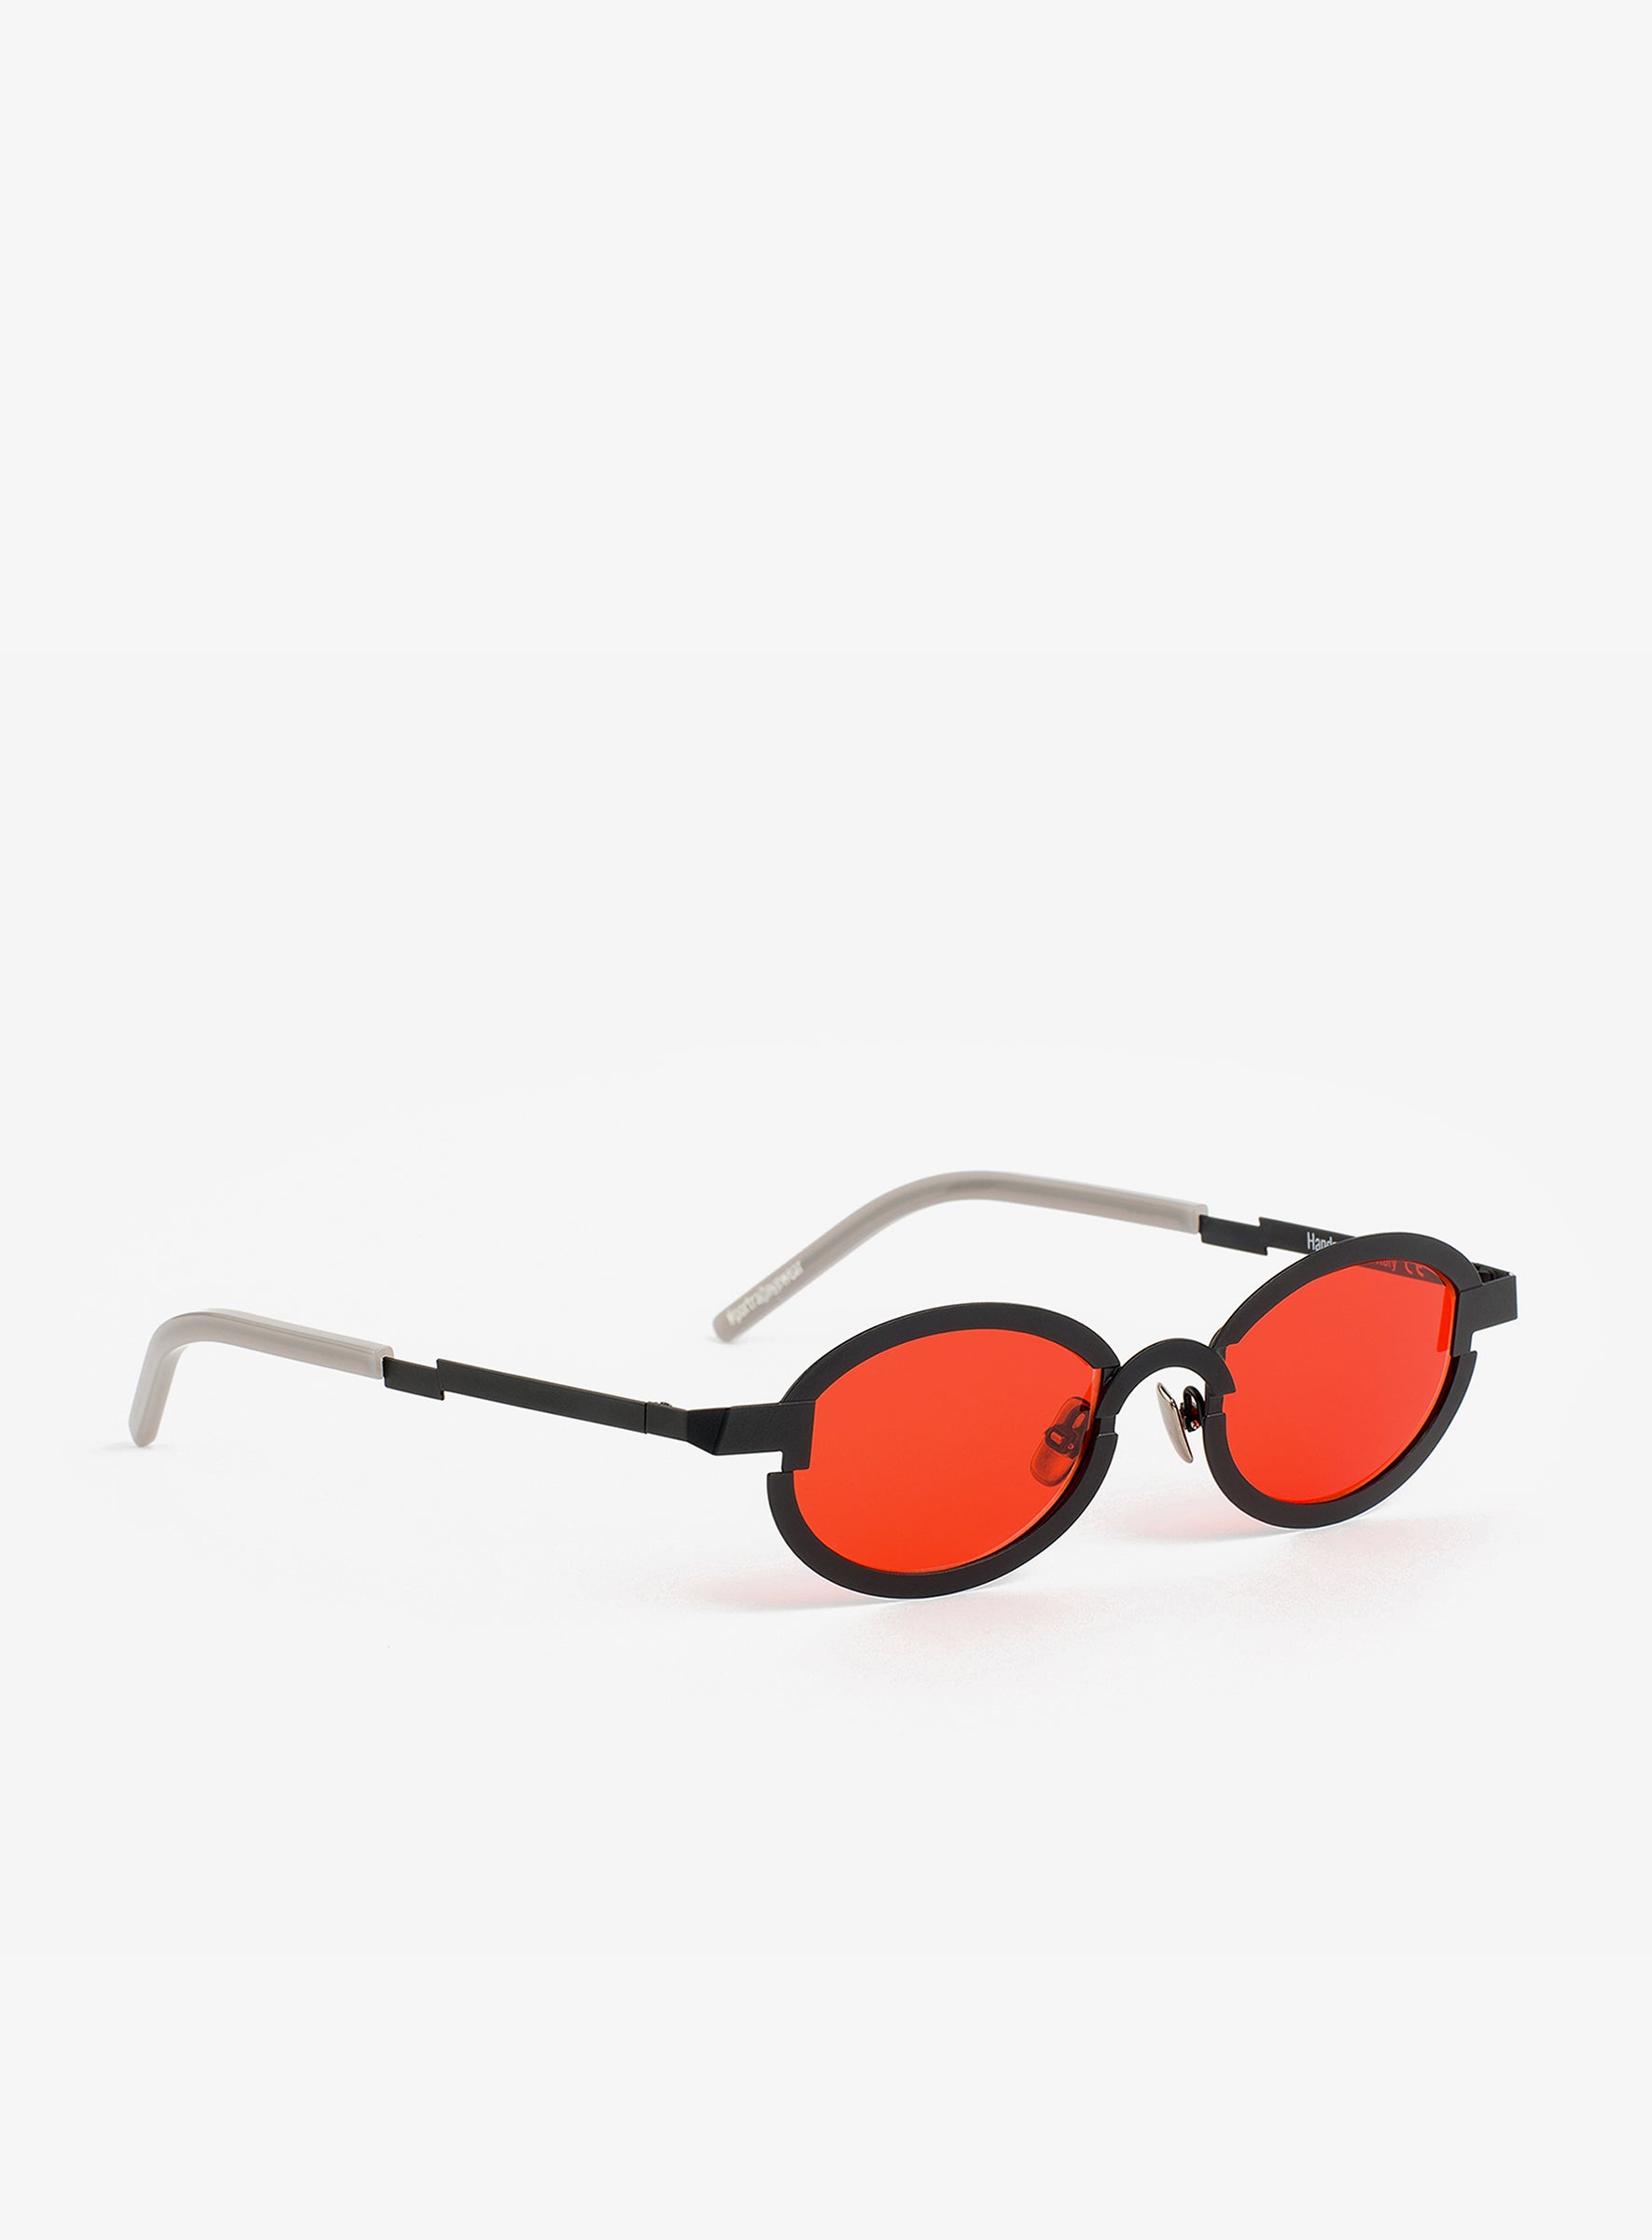 LYE Black with Red Lens